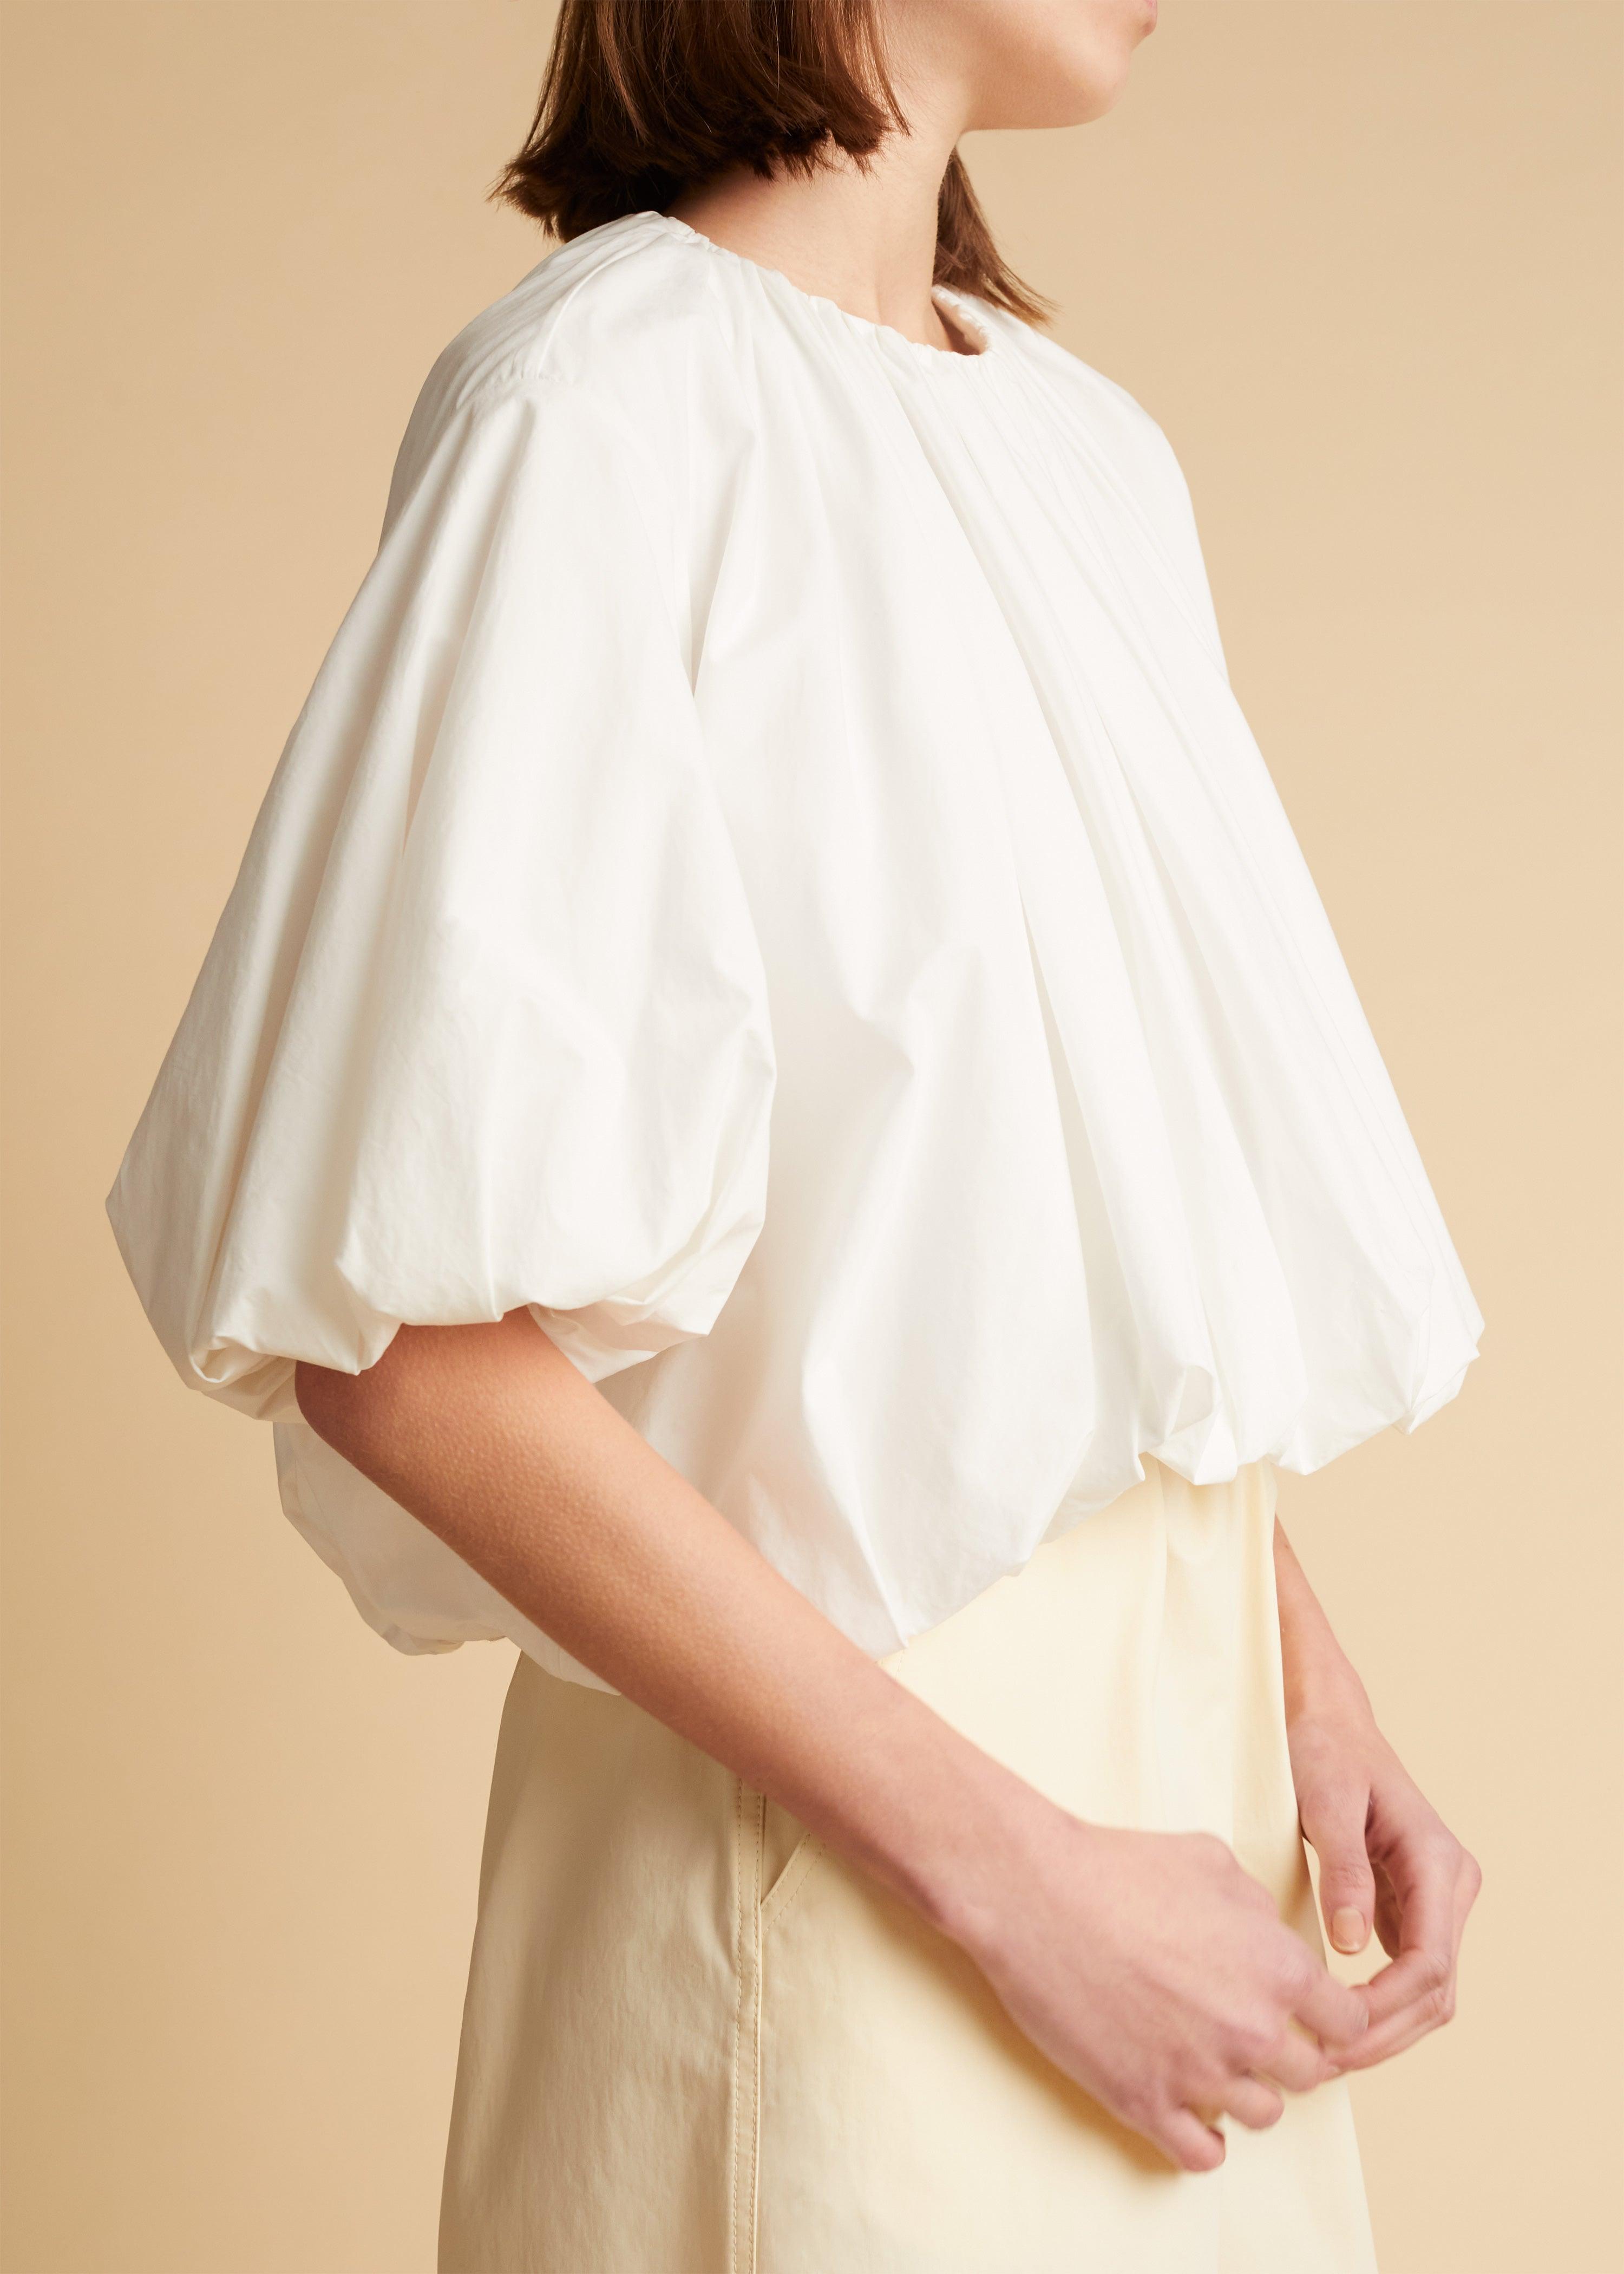 The Alma Top in White - The Iconic Issue